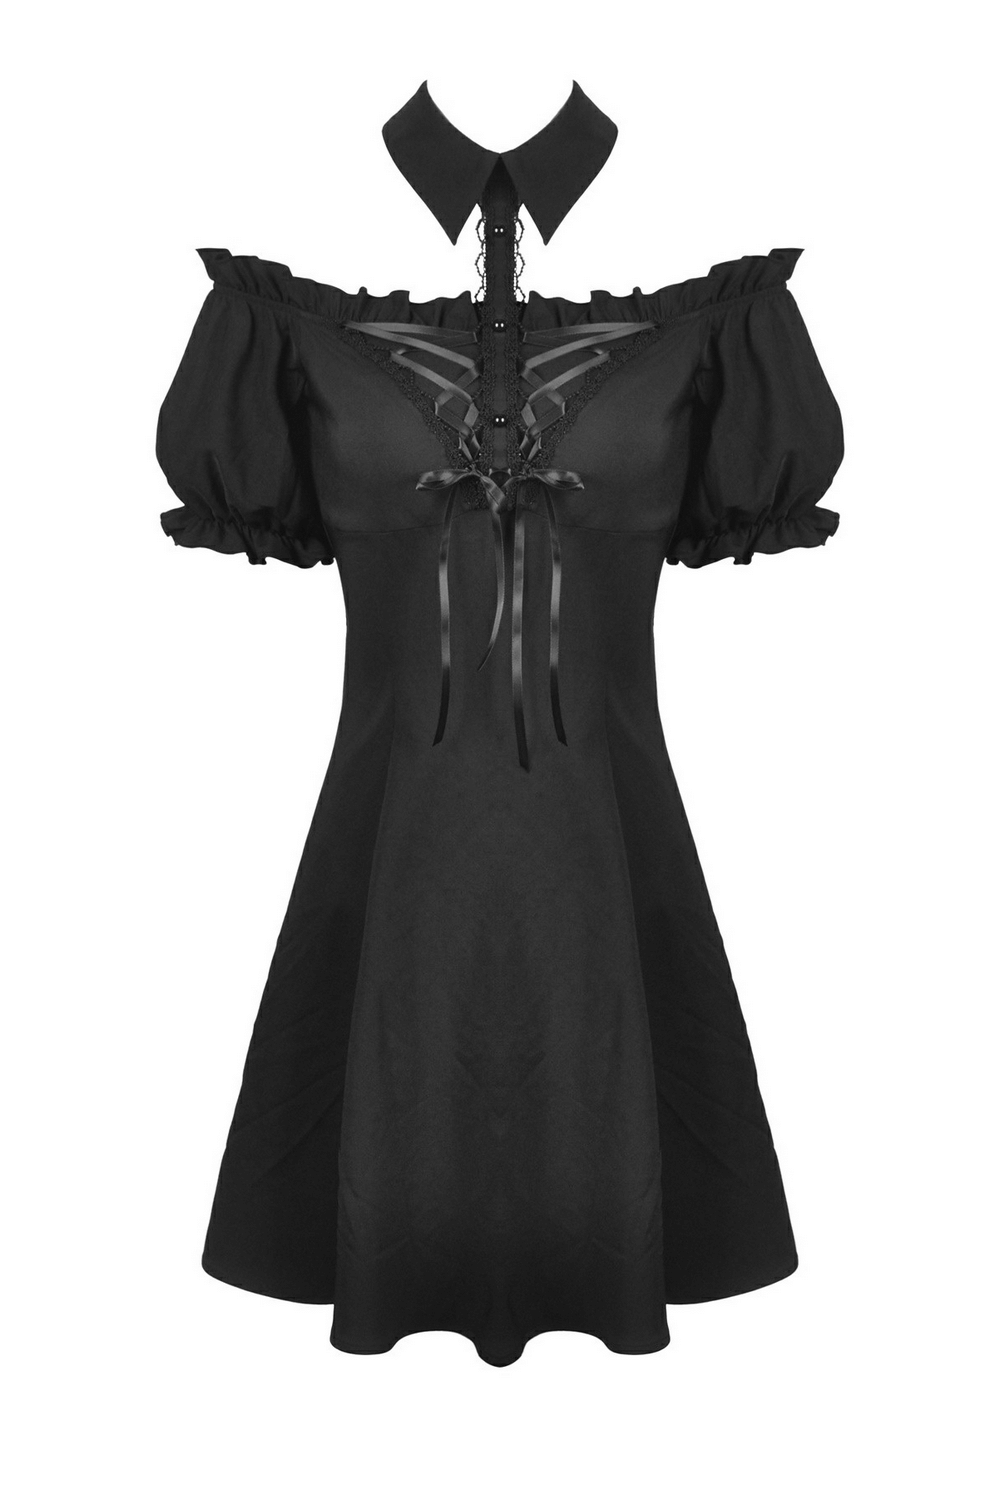 Women's Gothic Off-Shoulder Dress with Choker Collar